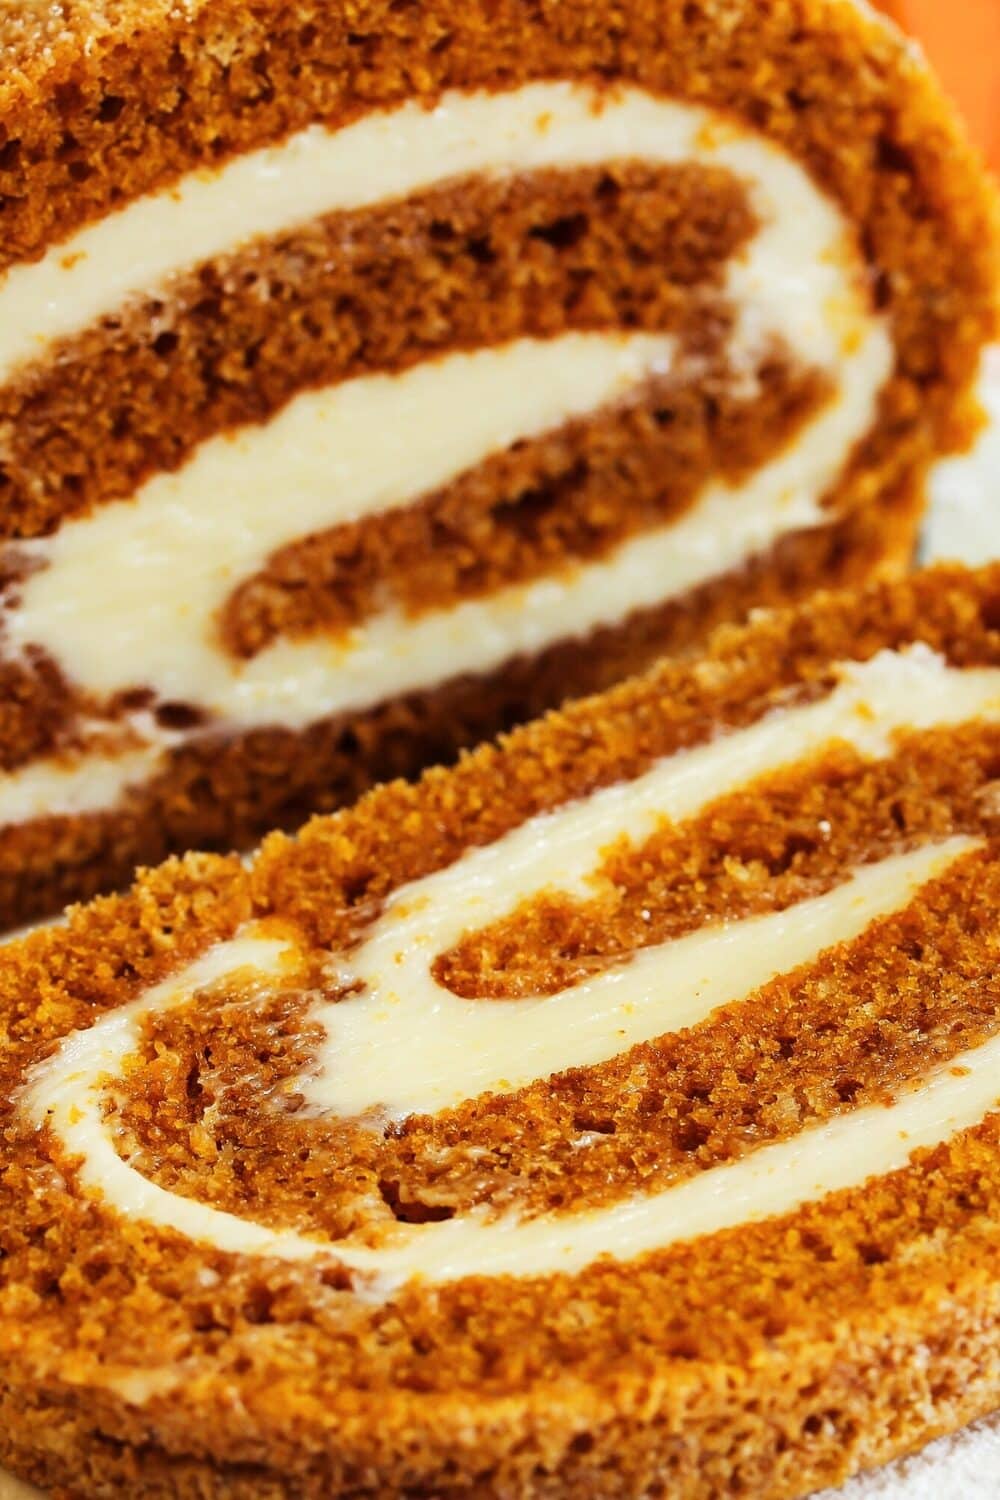 A pumpkin roll with cream cheese filling, sliced and displayed on a long plate.